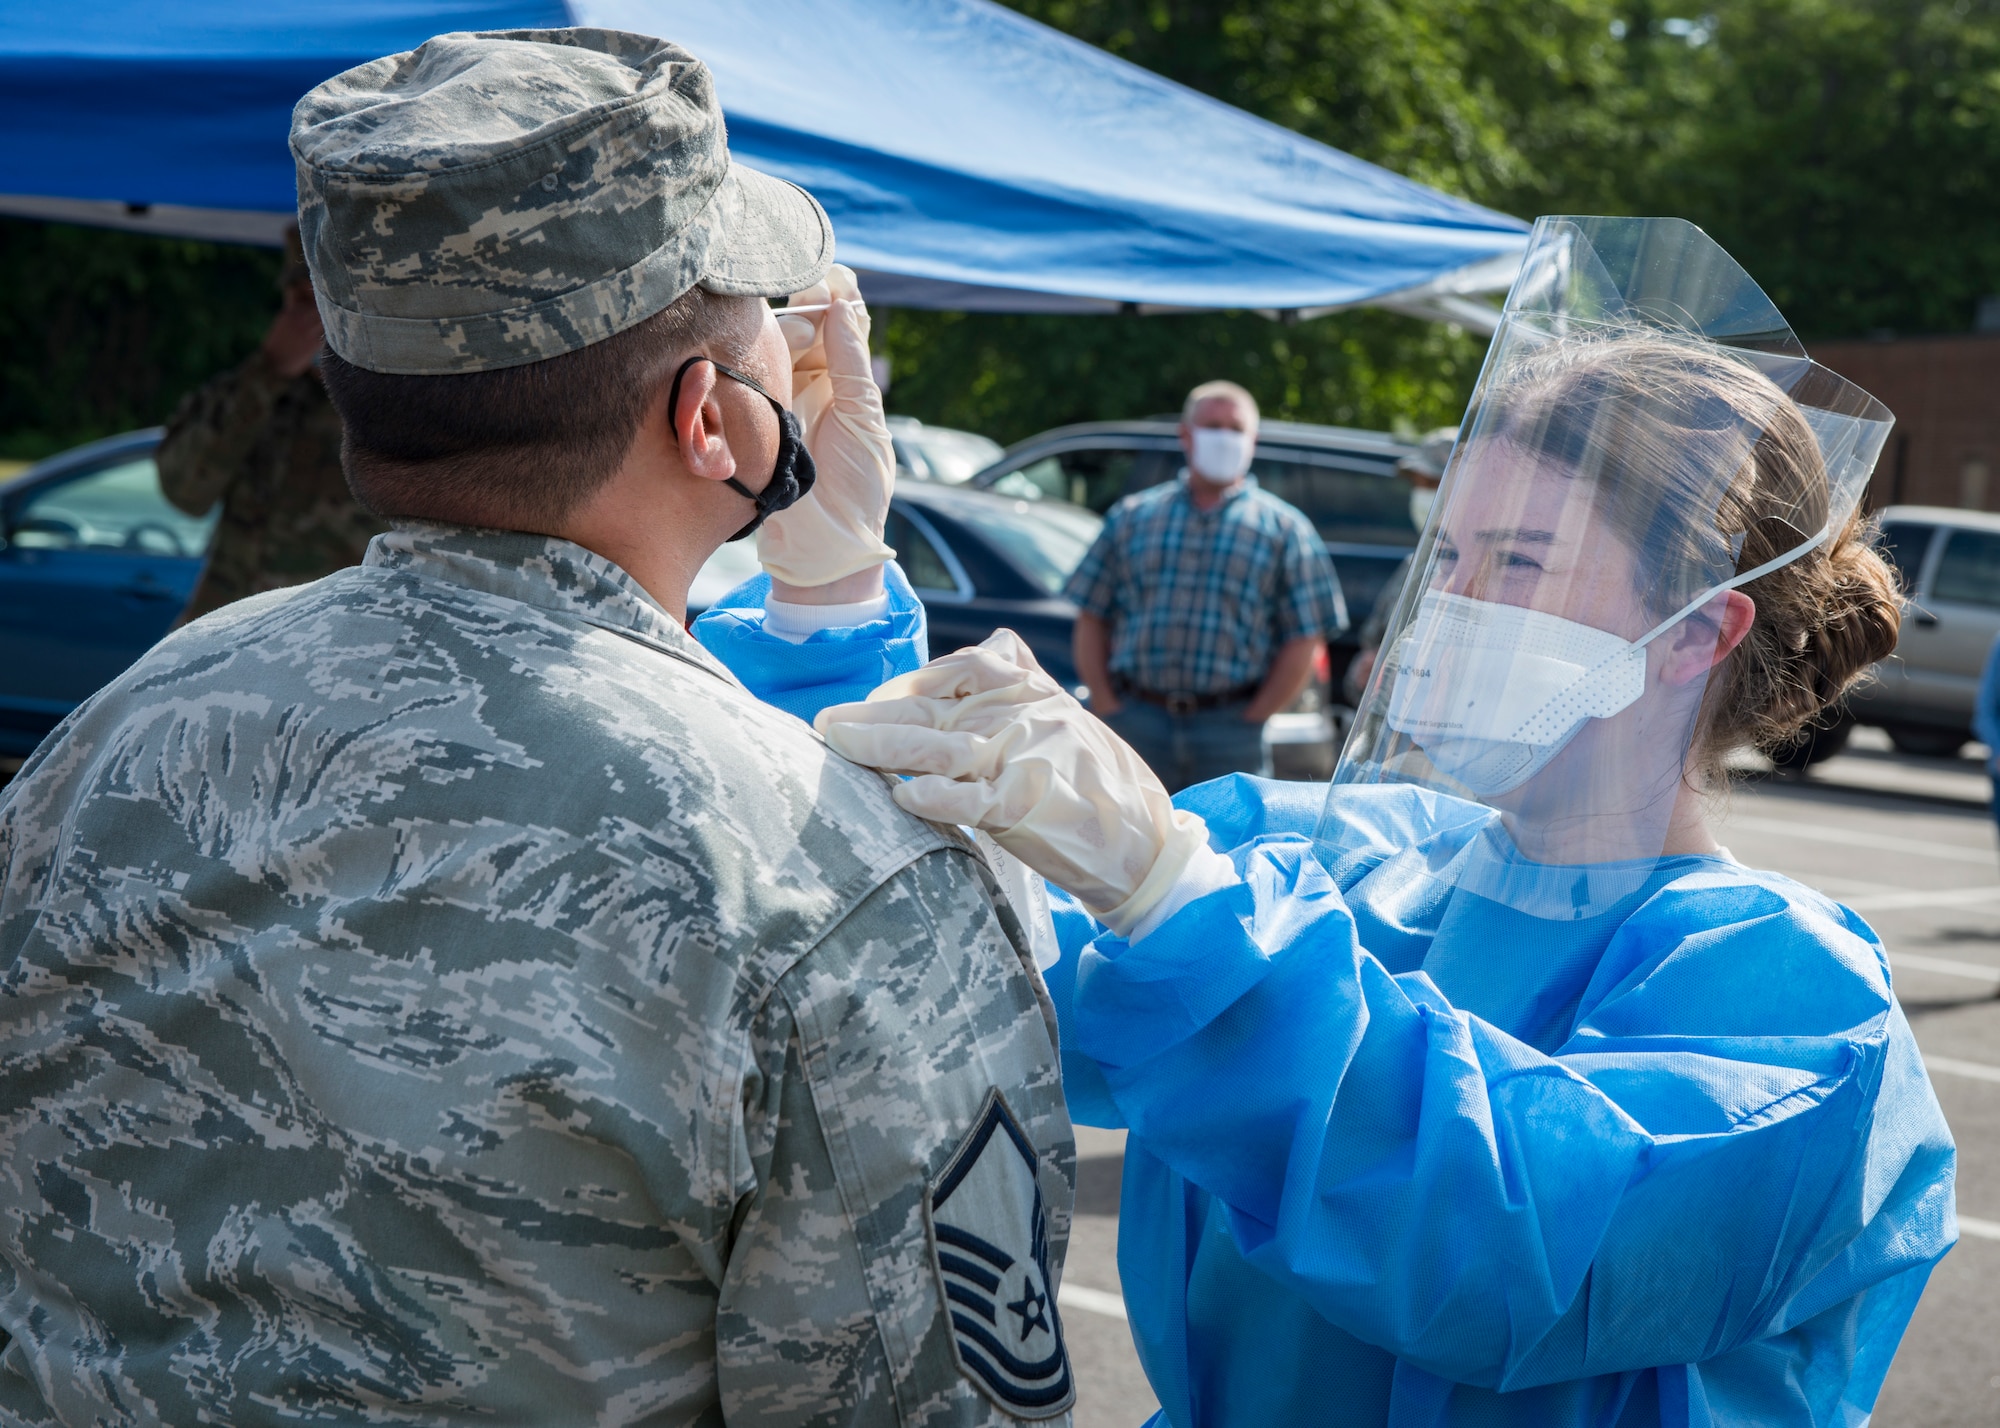 U.S. Air Force Staff Sgt. Carley Dolan, 103rd Medical Group aerospace medical technician, tests a 103rd Airlift Wing Airman for COVID-19 at Bradley Air National Guard Base, East Granby, Connecticut, June 19, 2020. The 103rd Medical Group worked in partnership with the Connecticut National Guard 14th Civil Support Team, New York National Guard 24th Civil Support Team, and Connecticut Department of Public Health to provide COVID-19 testing to Connecticut Air National Guard personnel. (U.S. Air National Guard photo by Staff Sgt. Steven Tucker)